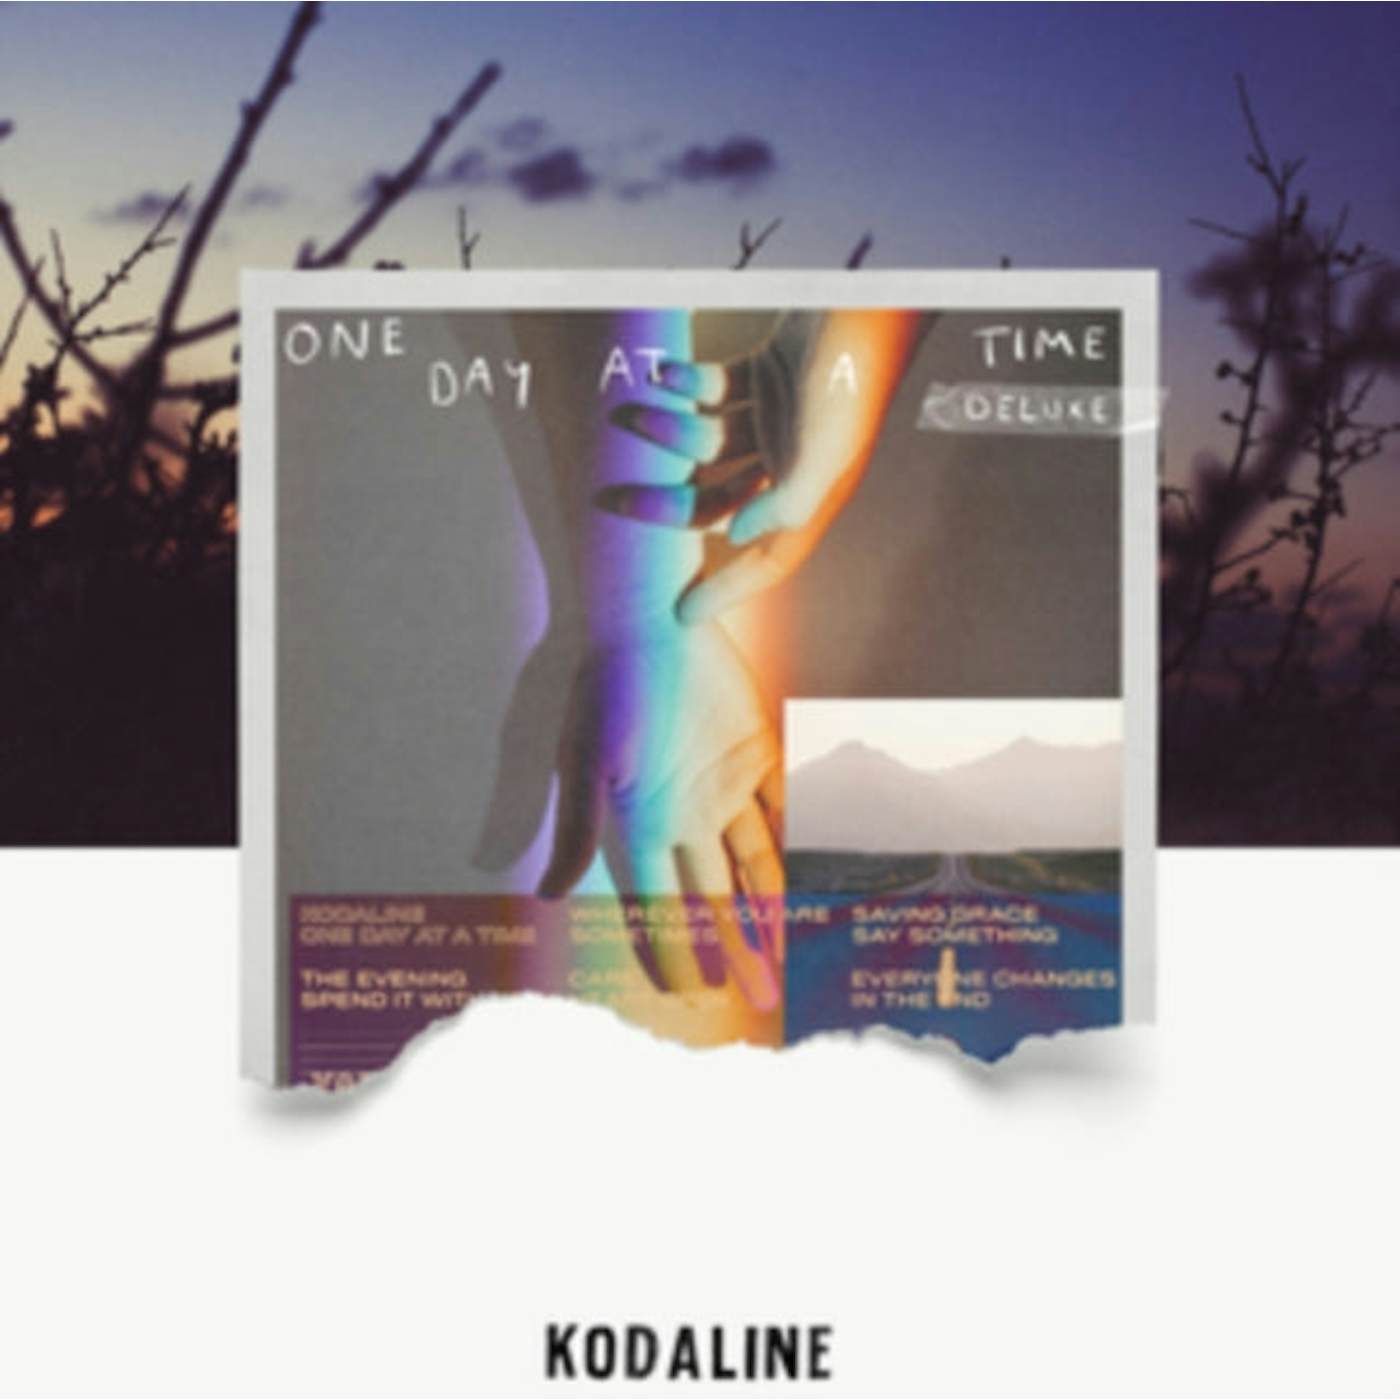 Kodaline LP Vinyl Record - One Day At A Time (Deluxe Edition)